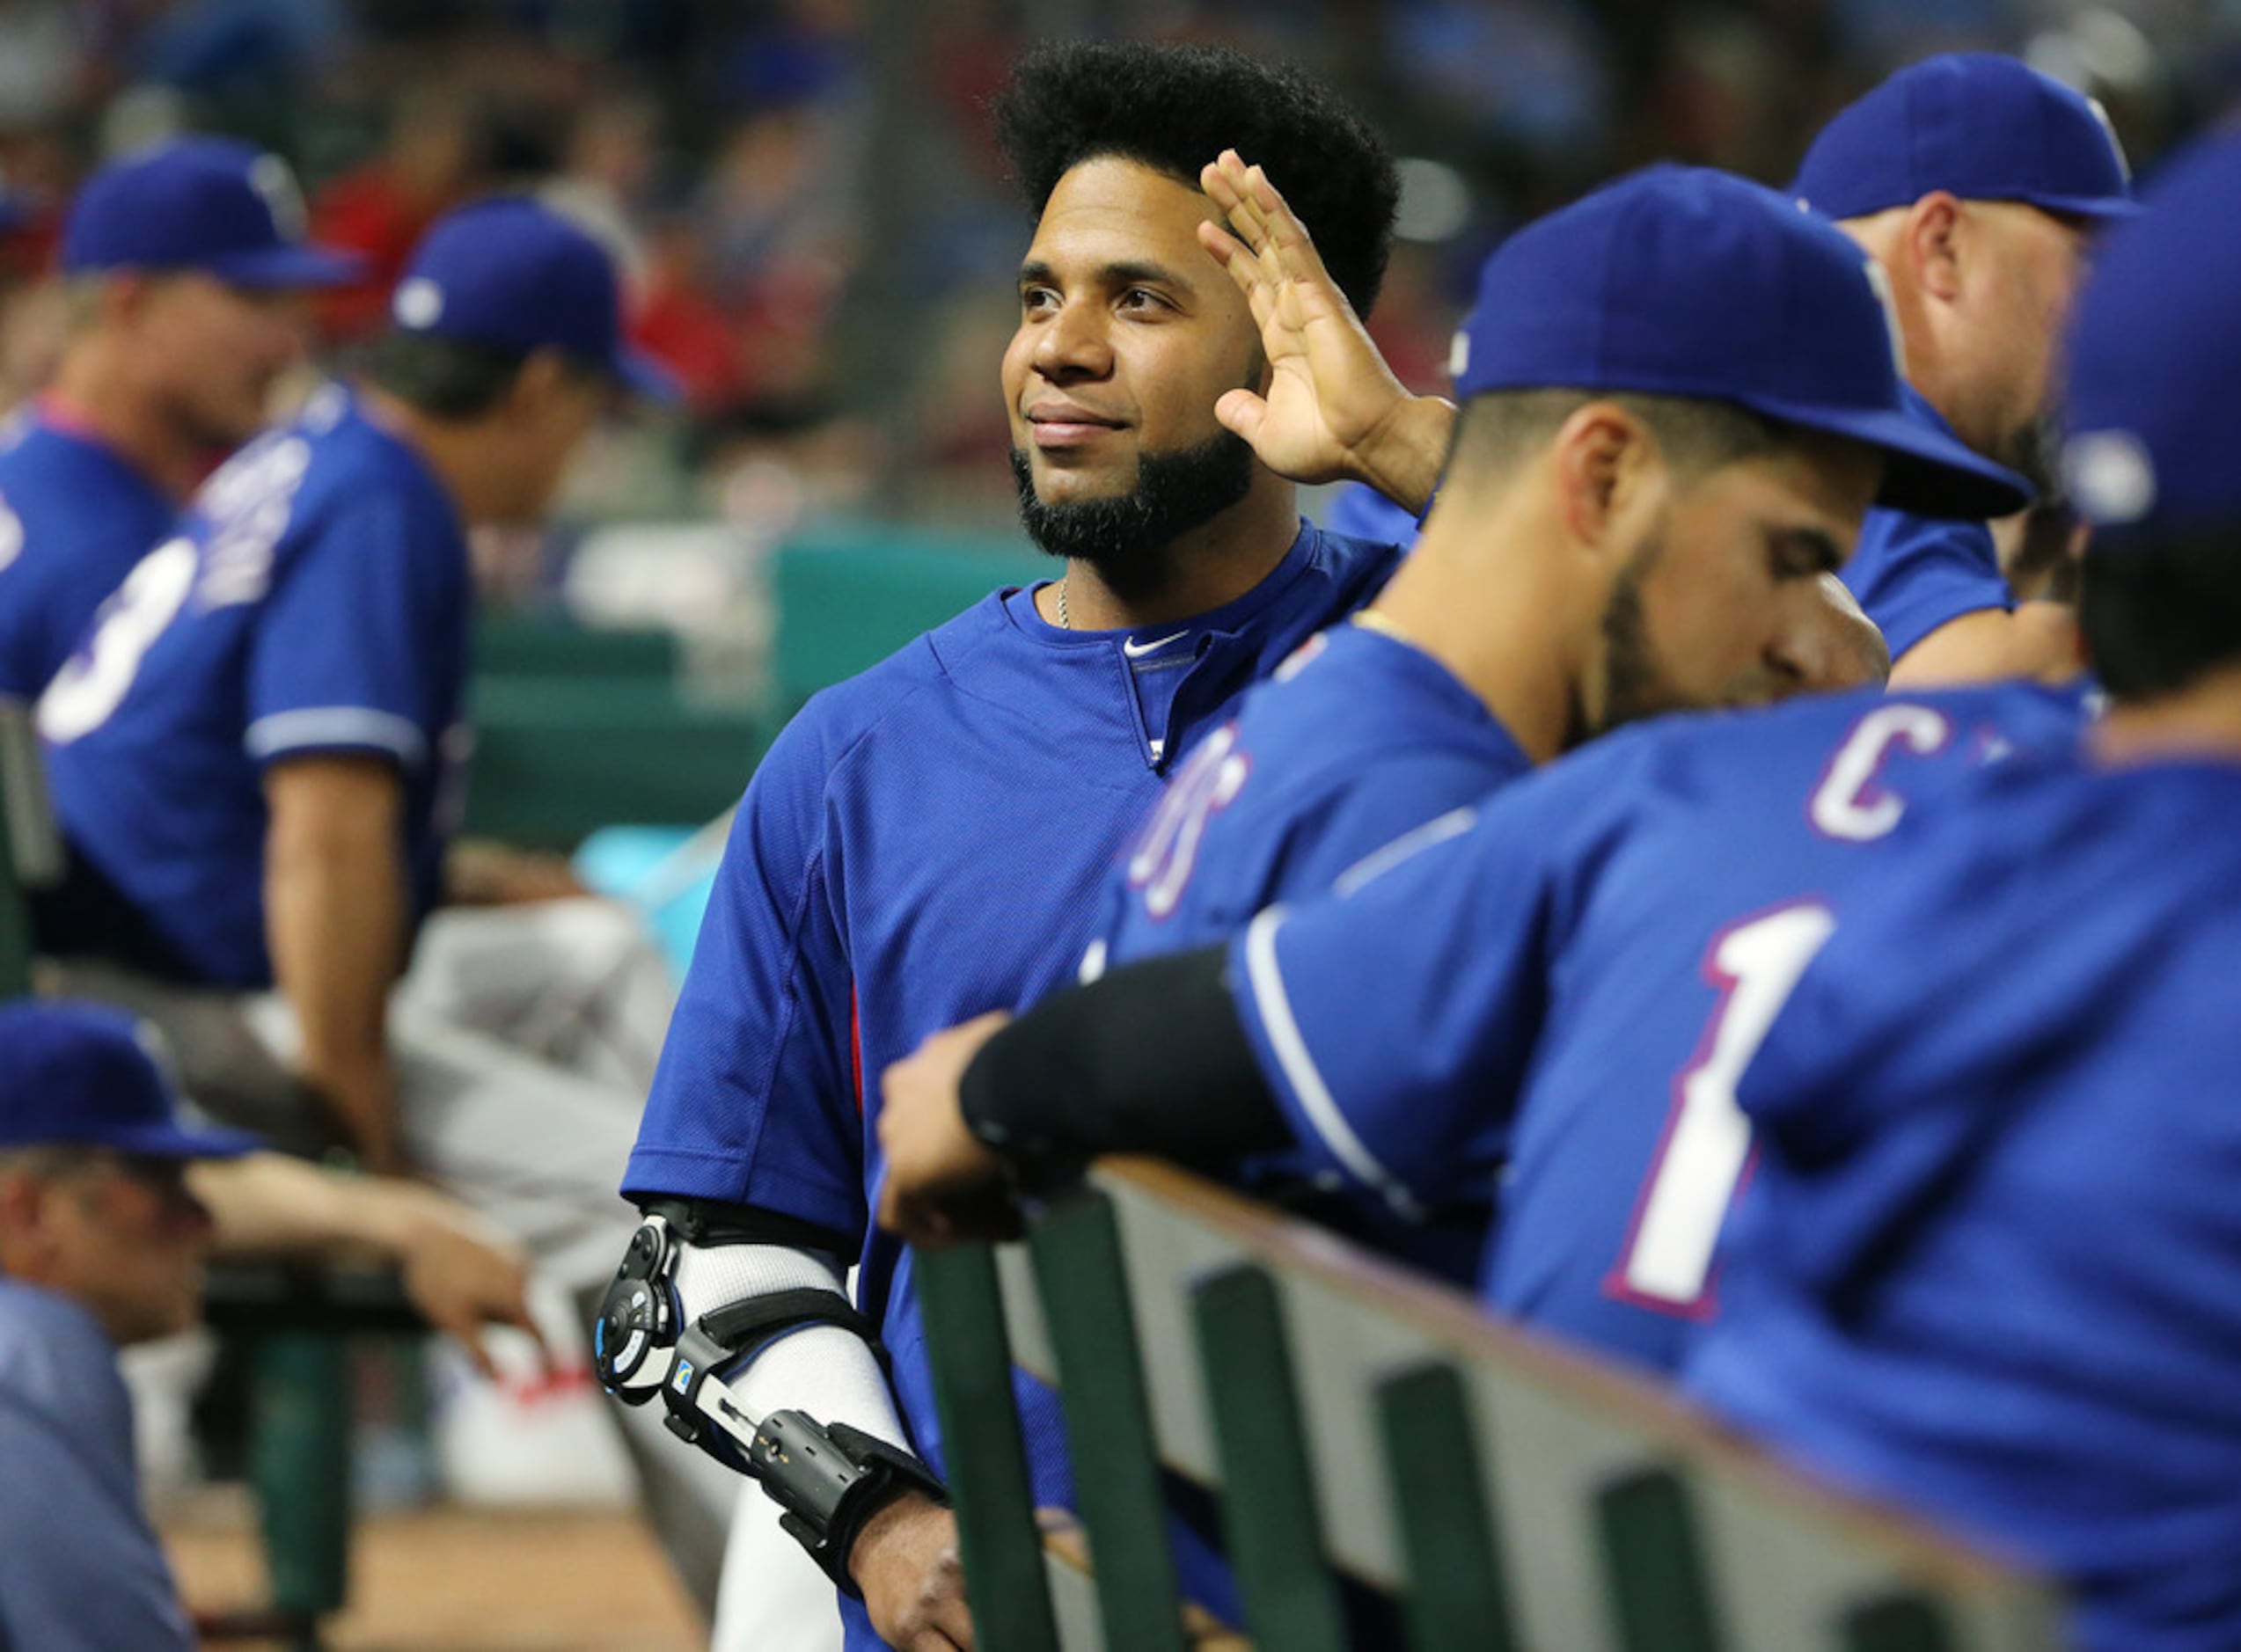 Elvis Andrus hangs in there, and now it's on the rest of us - The